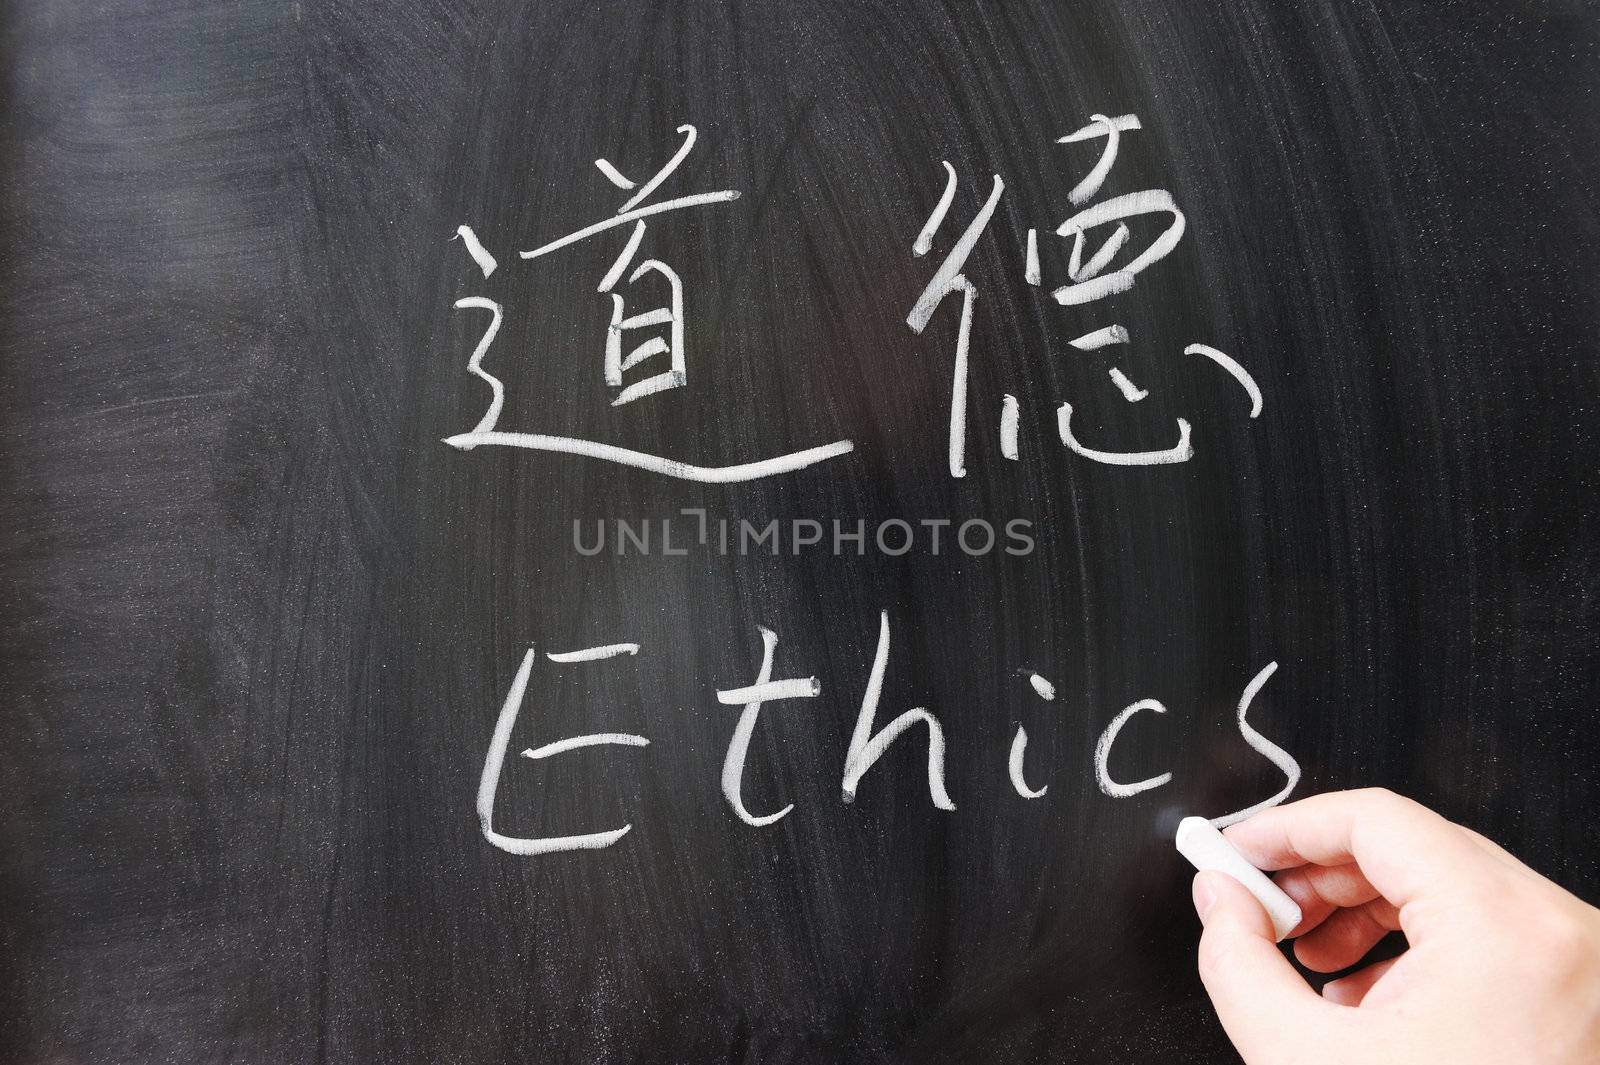 Ethics word in Chinese and English written on the chalkboard